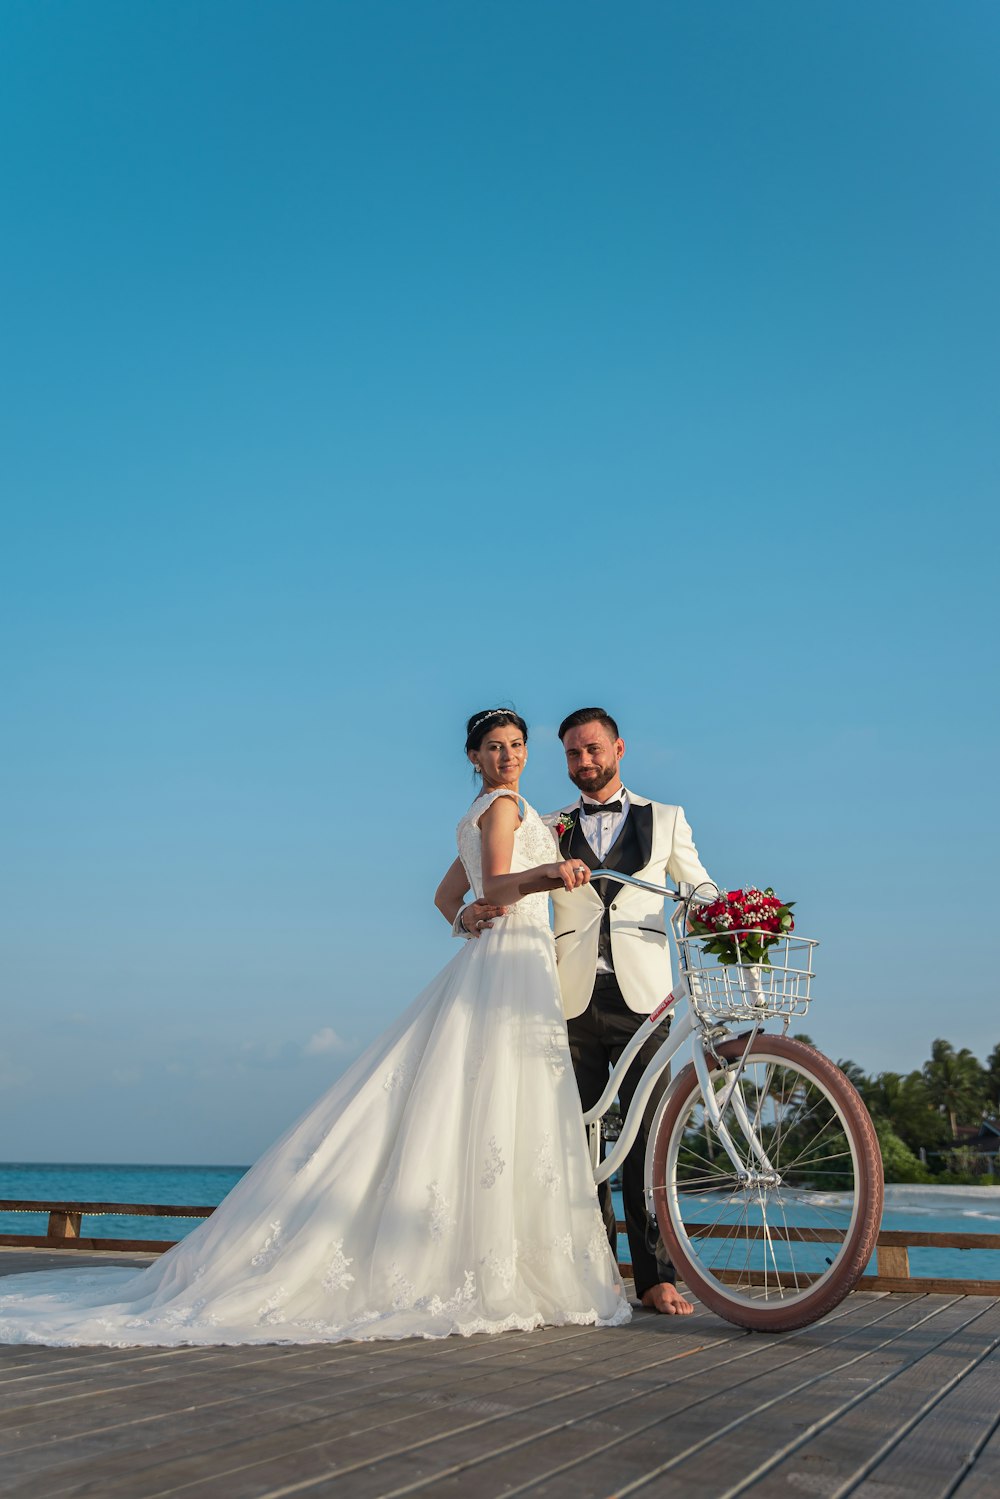 man and woman in wedding dress riding bicycle on beach during daytime